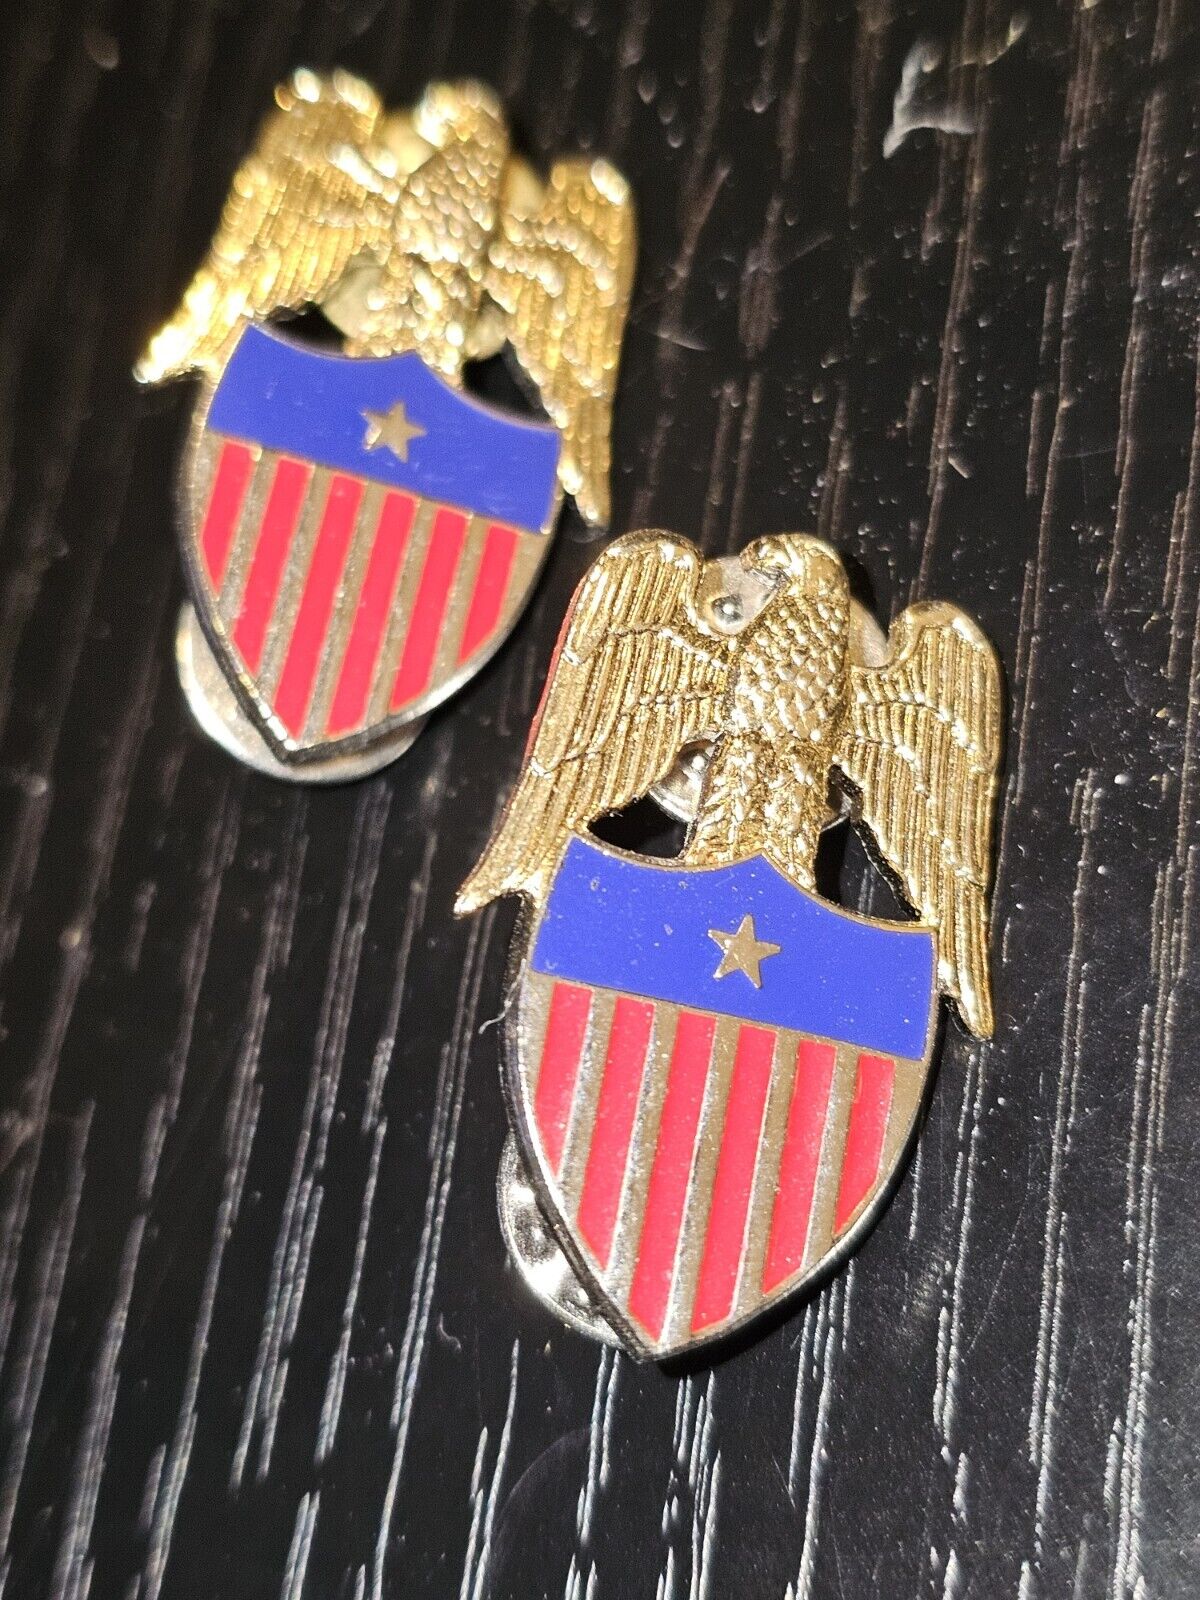 1960s 70s US Army Officer 1 Star General Aide De Camp Pin Badge Set L@@K